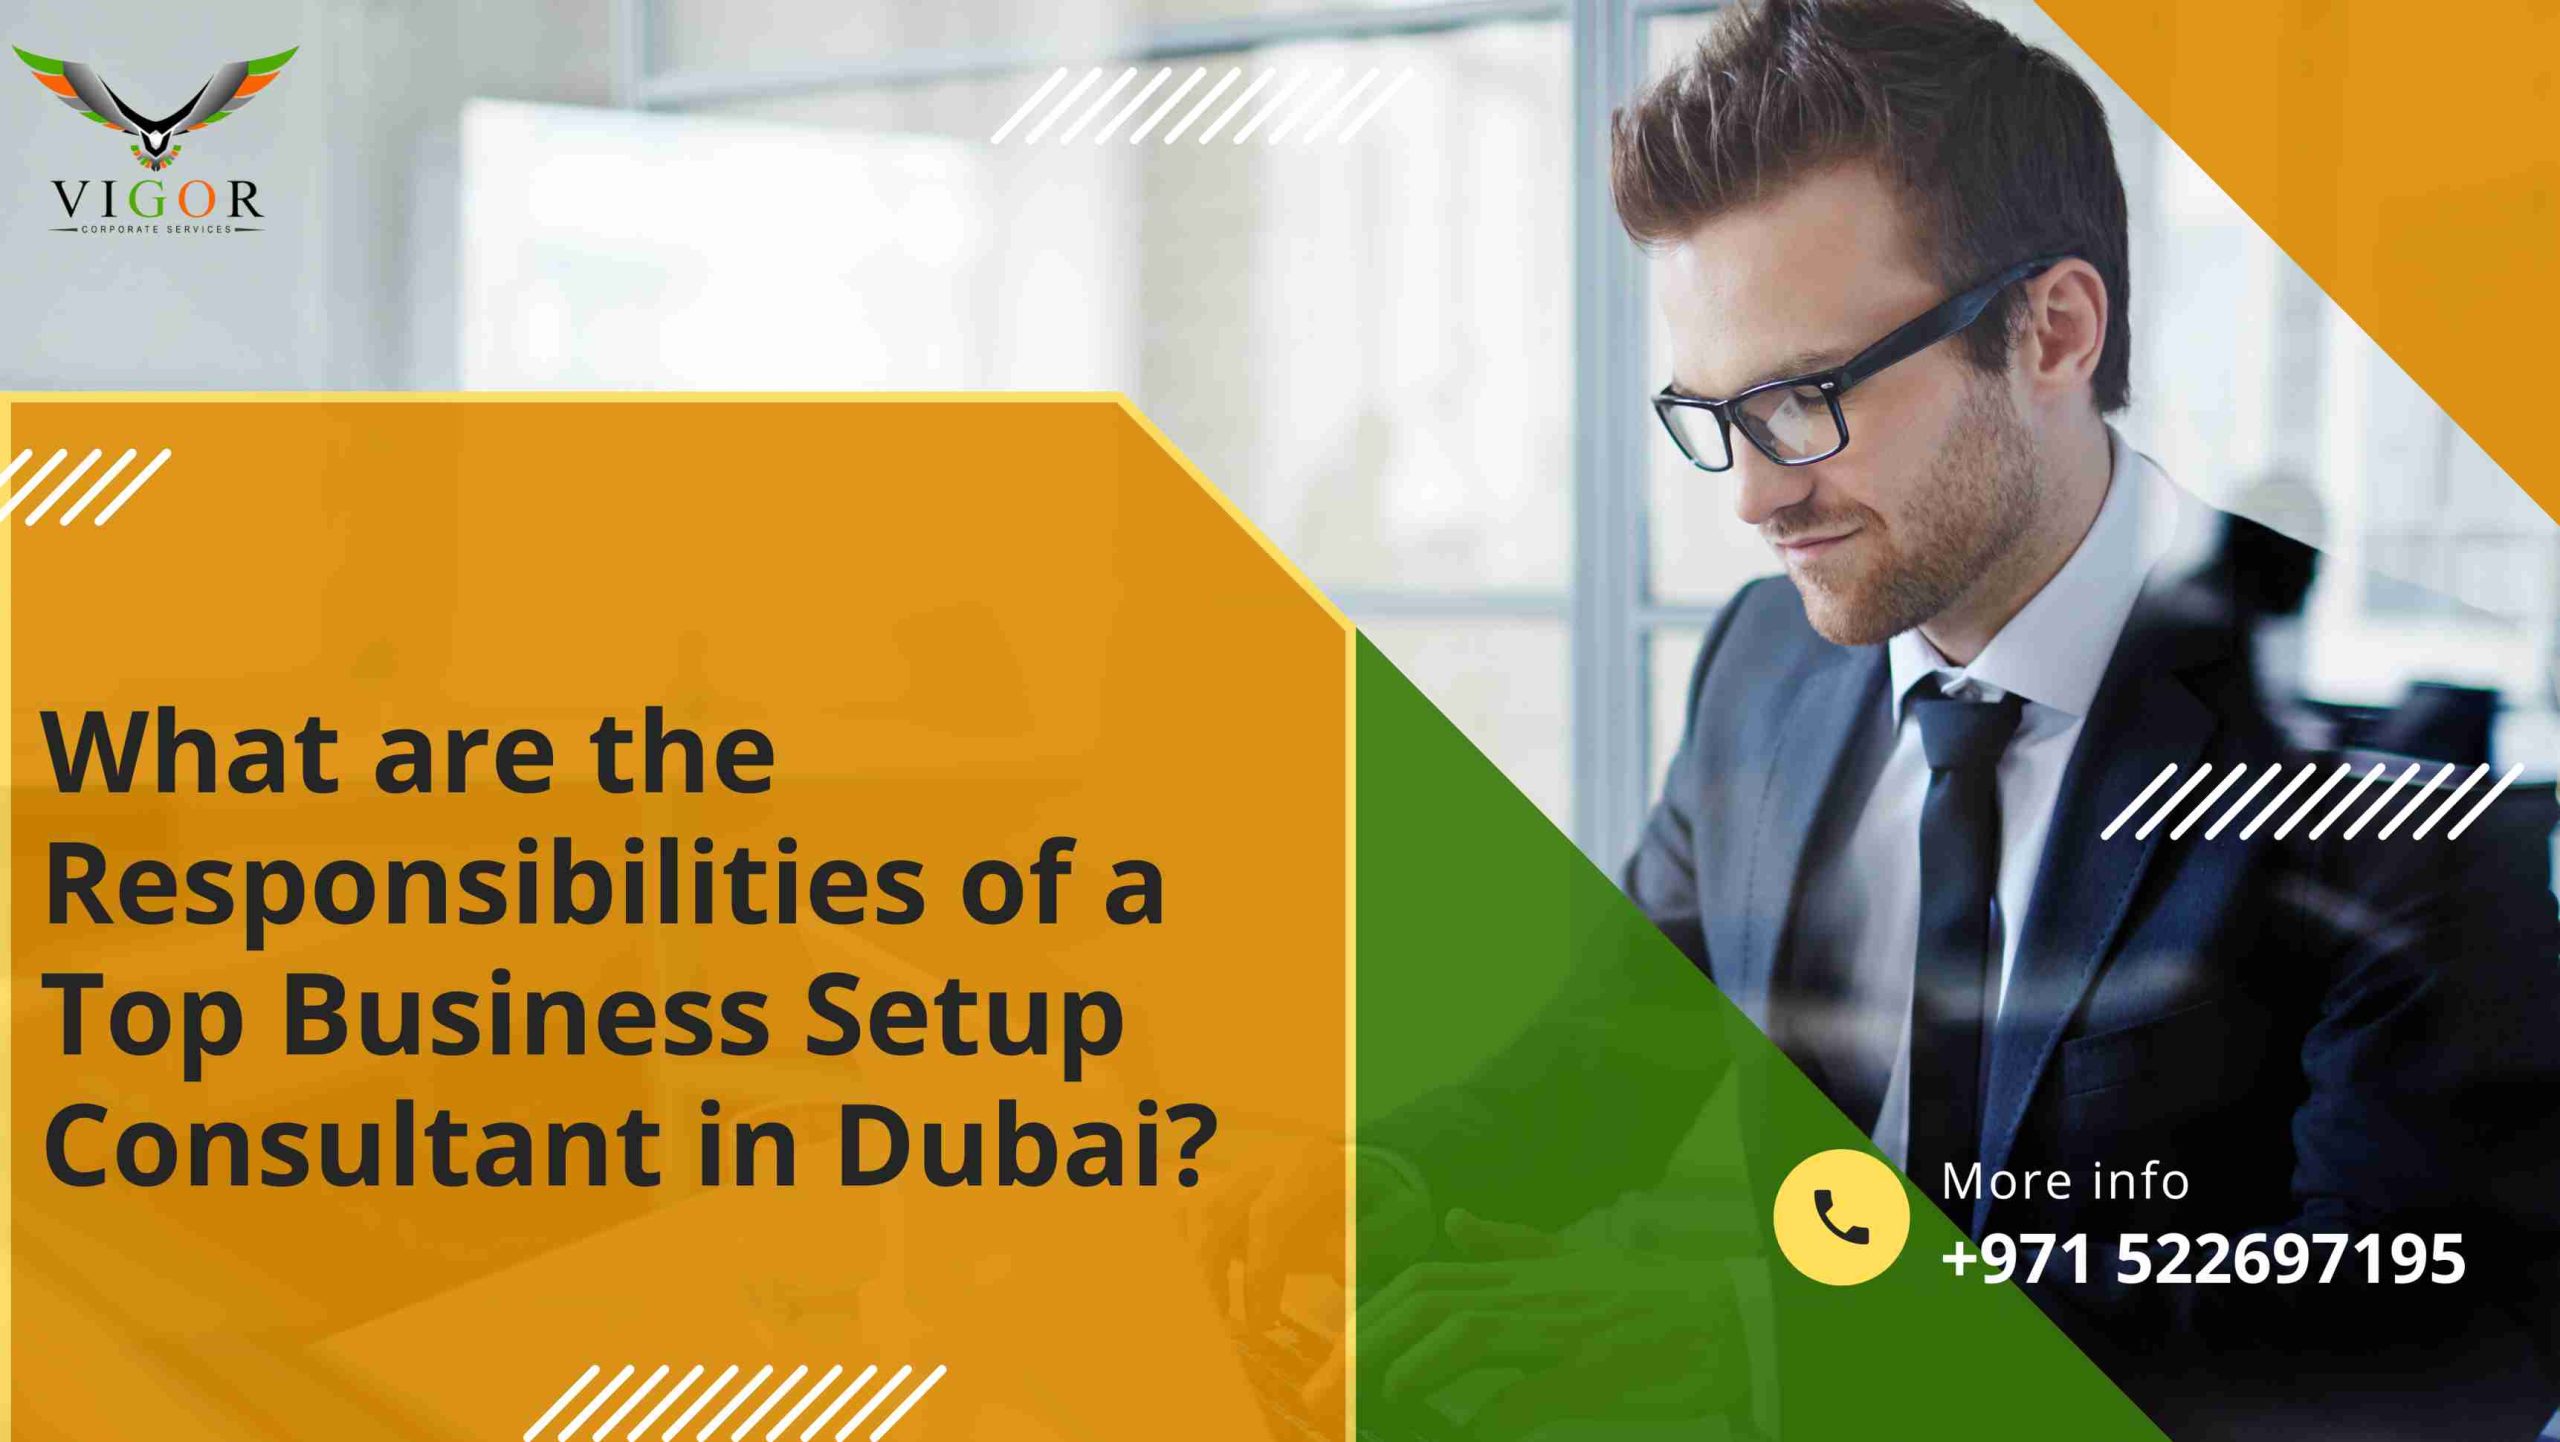 What are the Responsibilities of a Top Business Setup Consultant in Dubai?